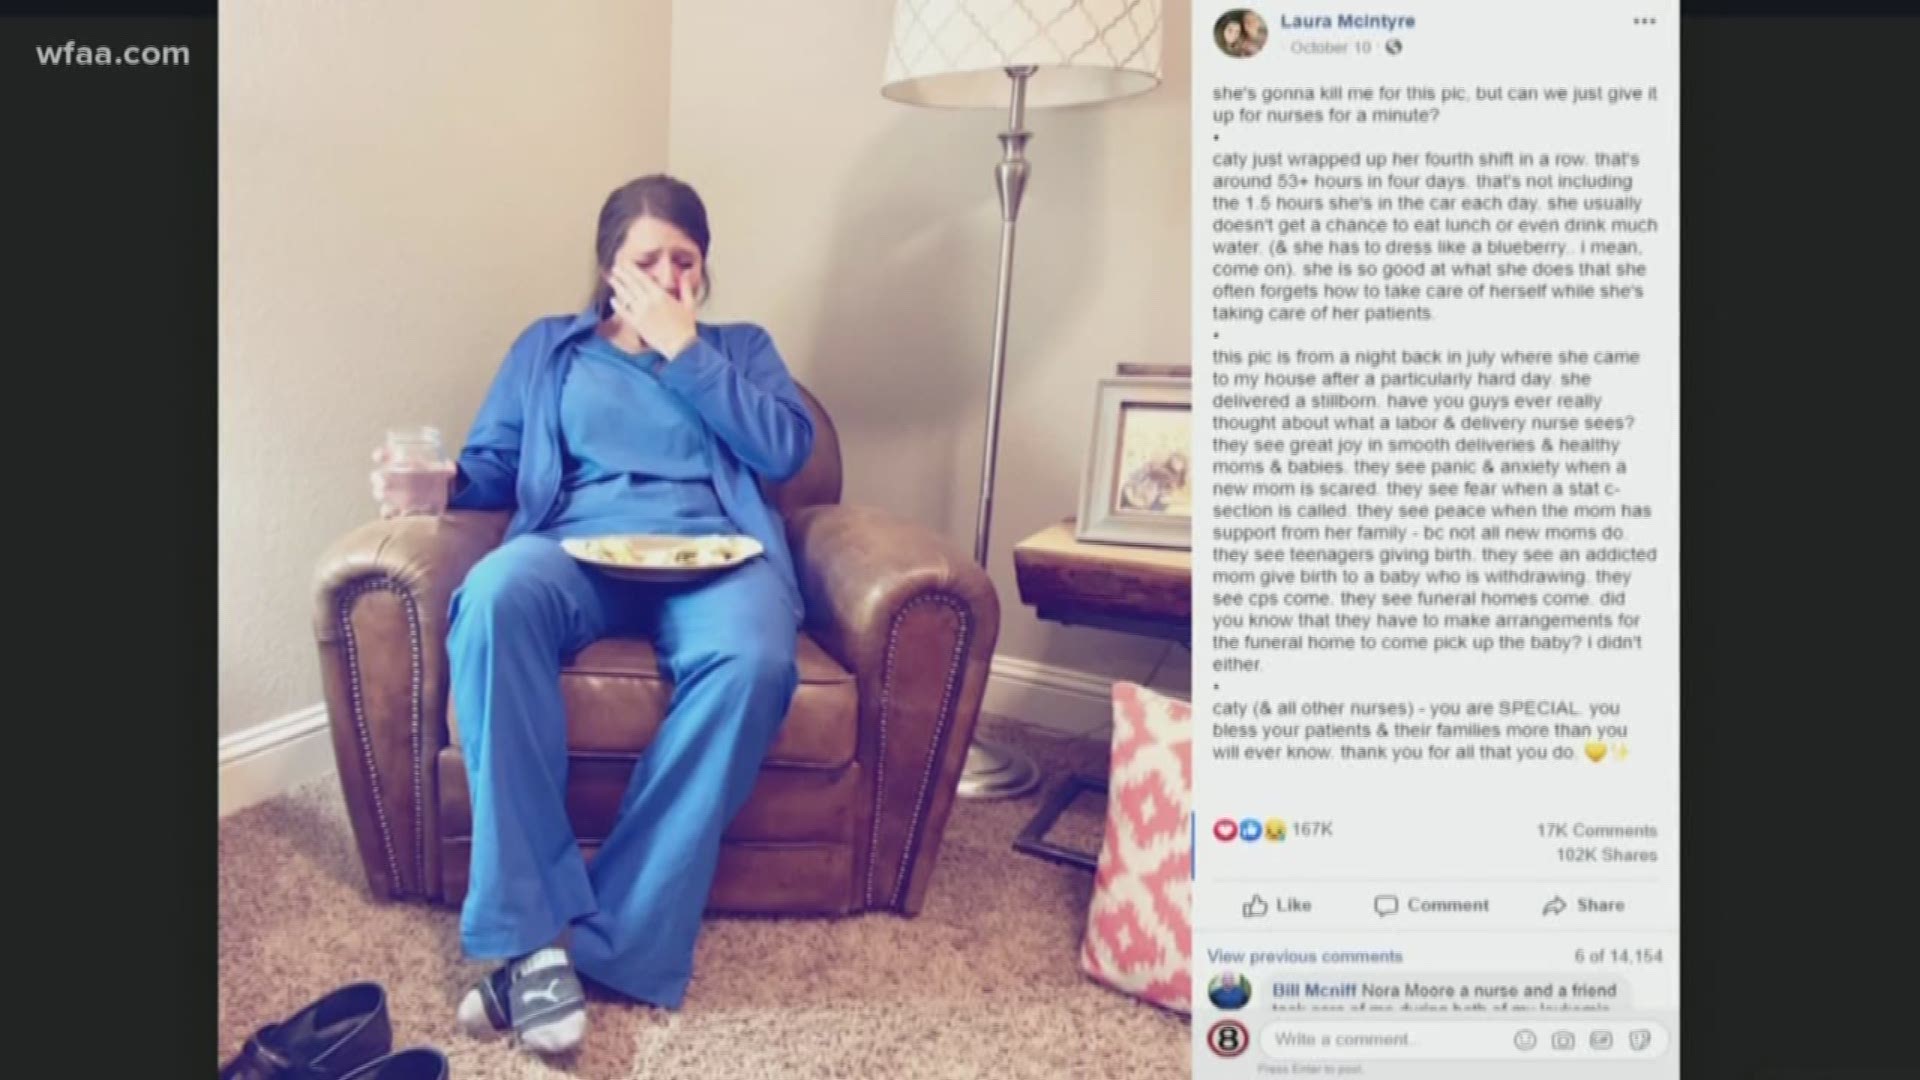 A photo of one North Texas nurse went viral this week after her sister shared it on Facebook. It's been shared more than 104,000 times.